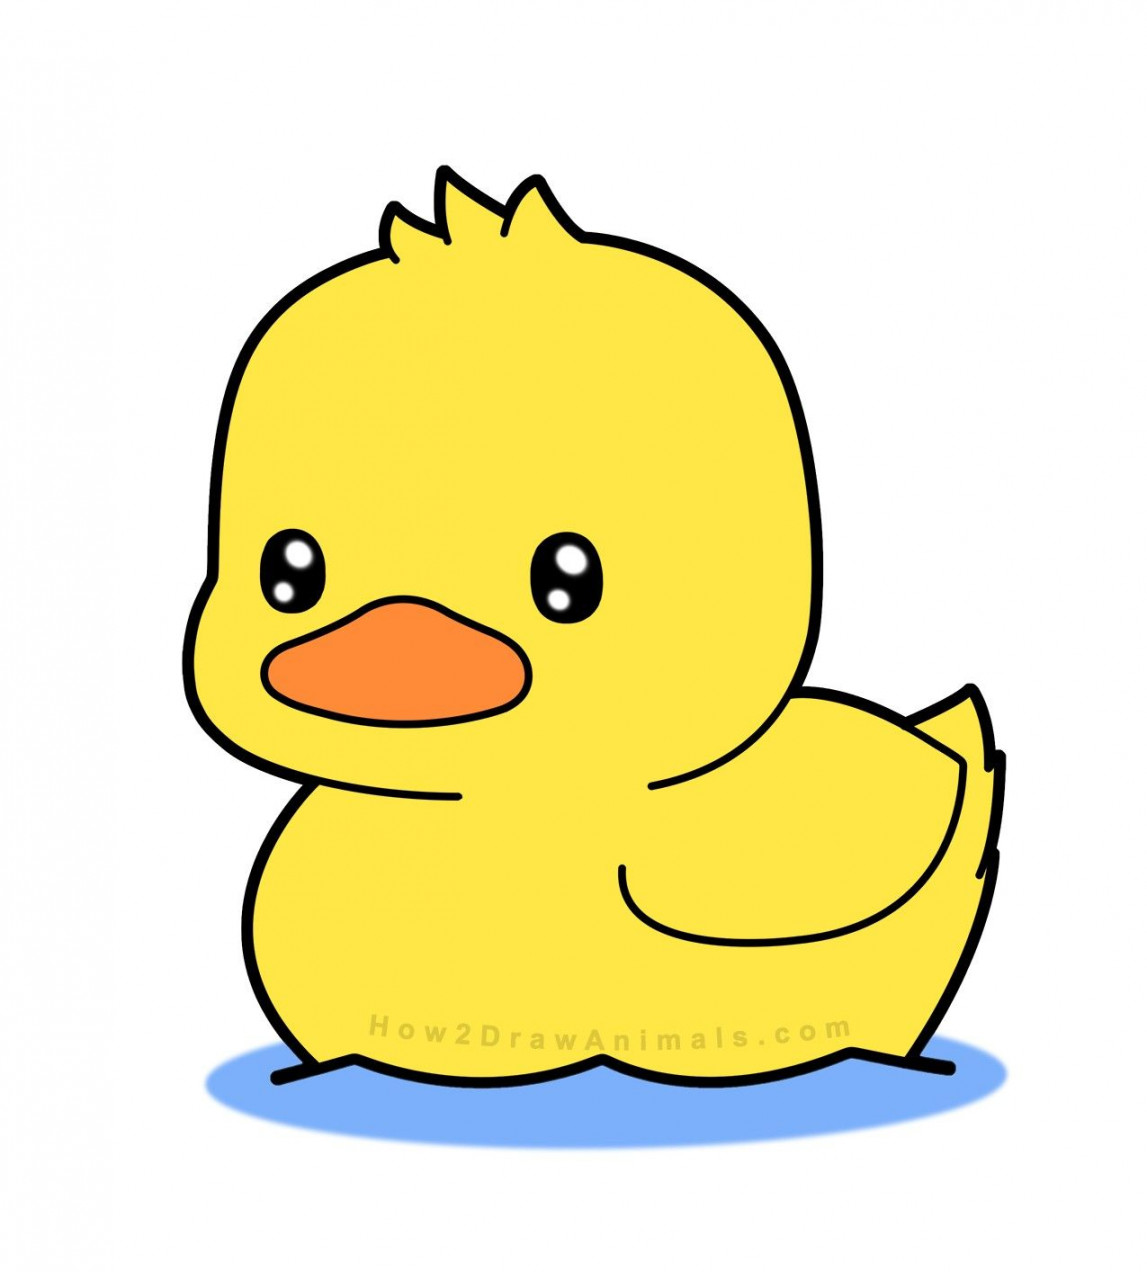 How to draw a duckling #howtodraw #illustration #babyanimals #duck